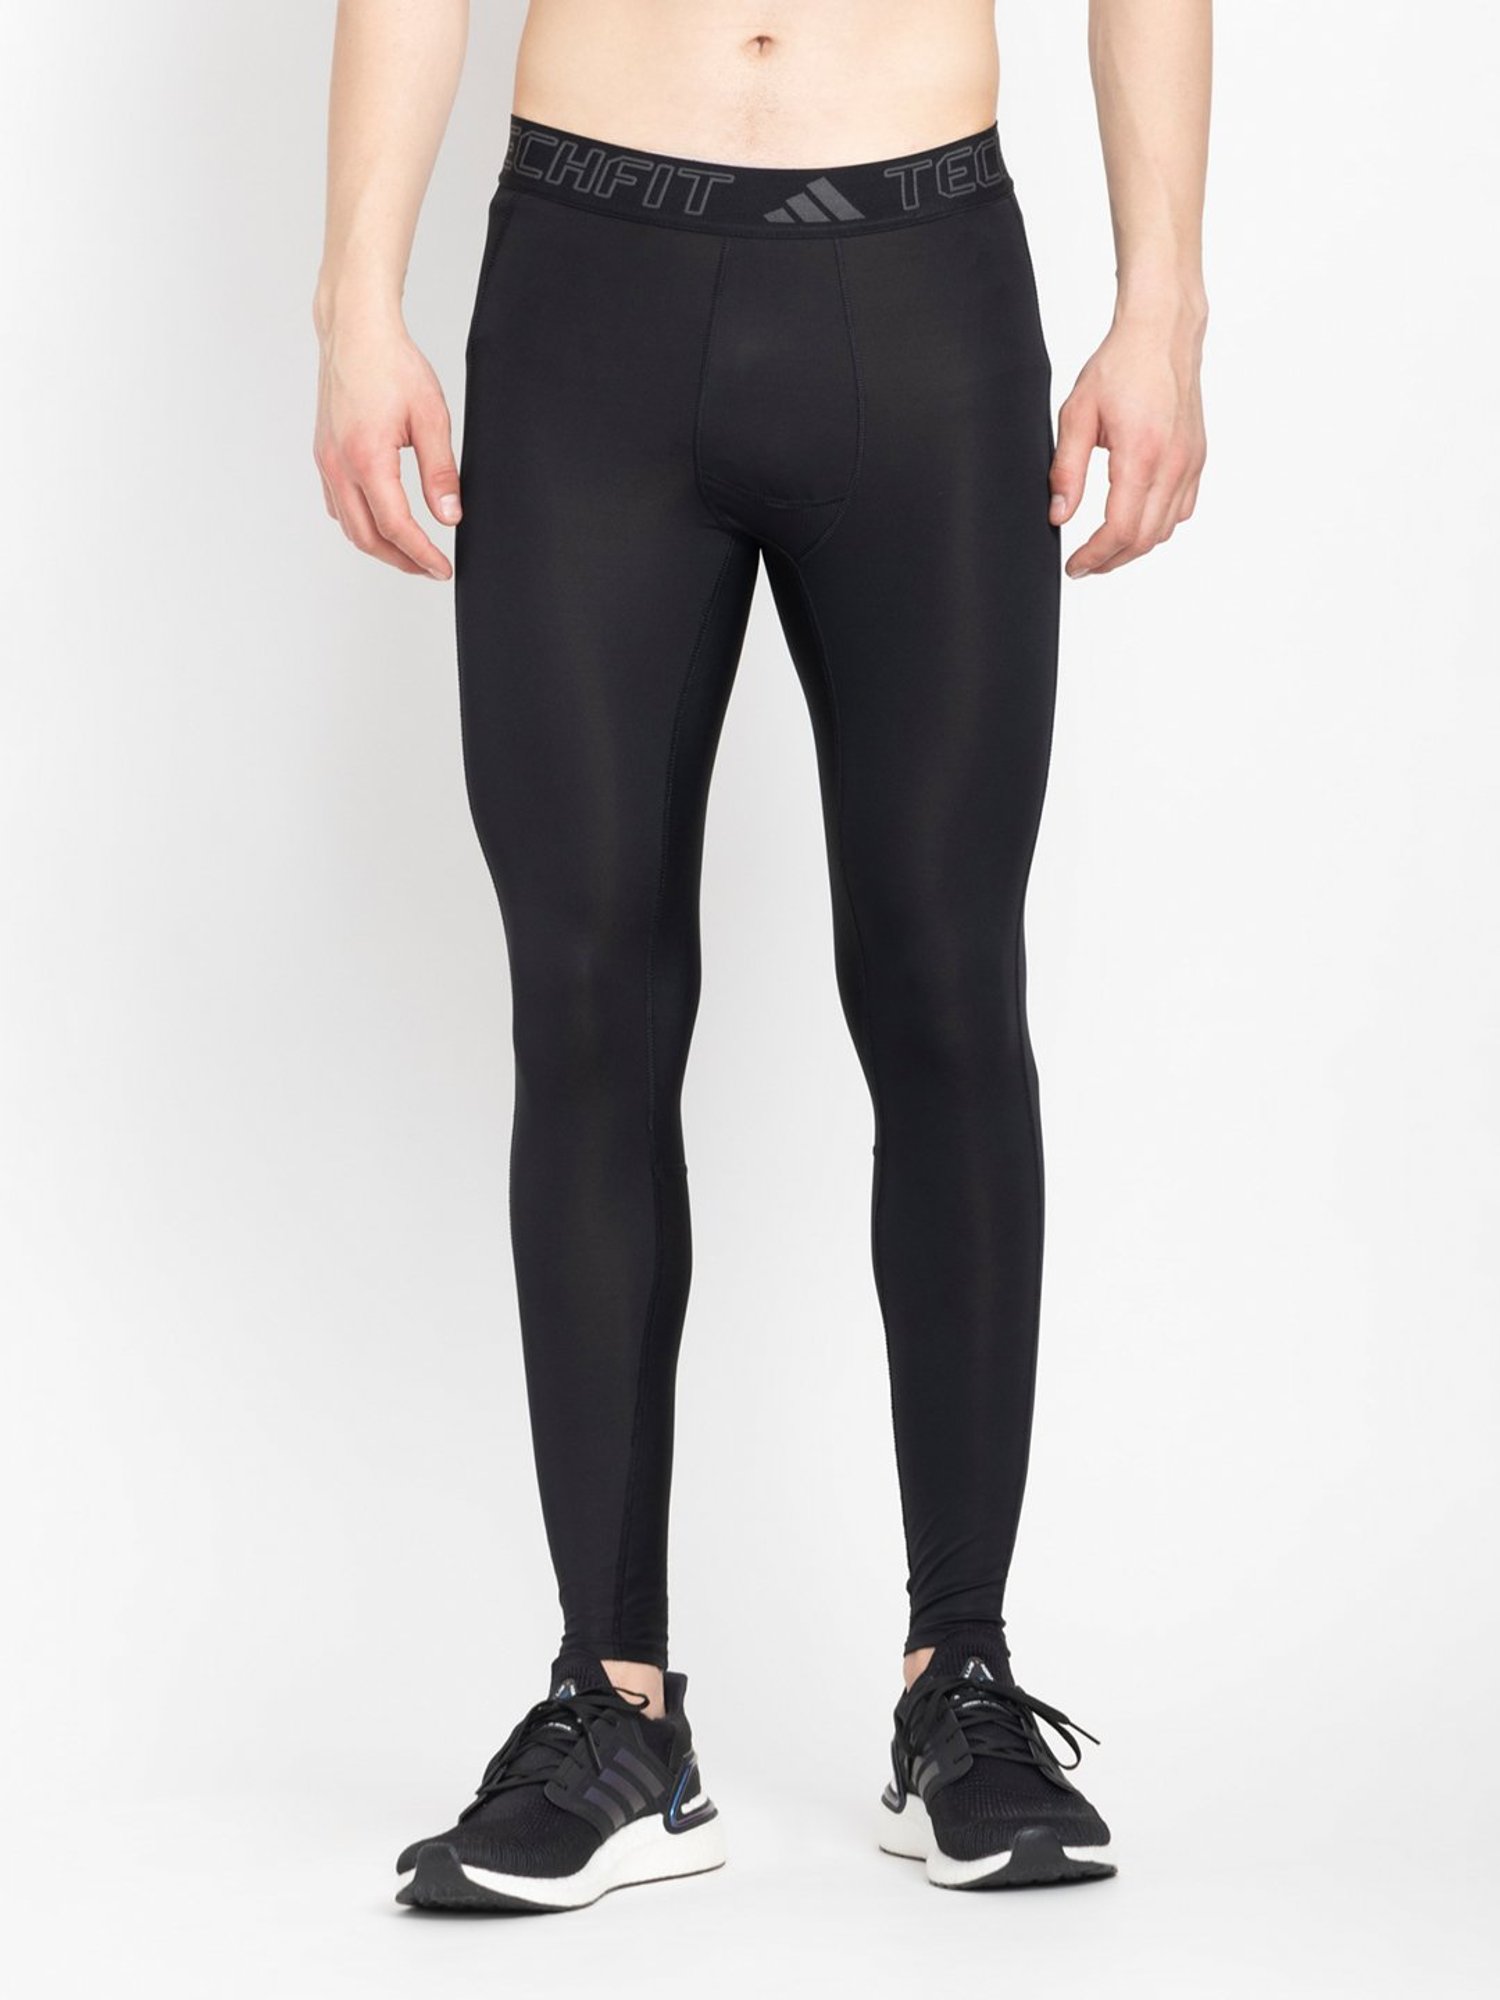 Buy Adidas Green Slim Fit High Rise Tights for Women's Online @ Tata CLiQ